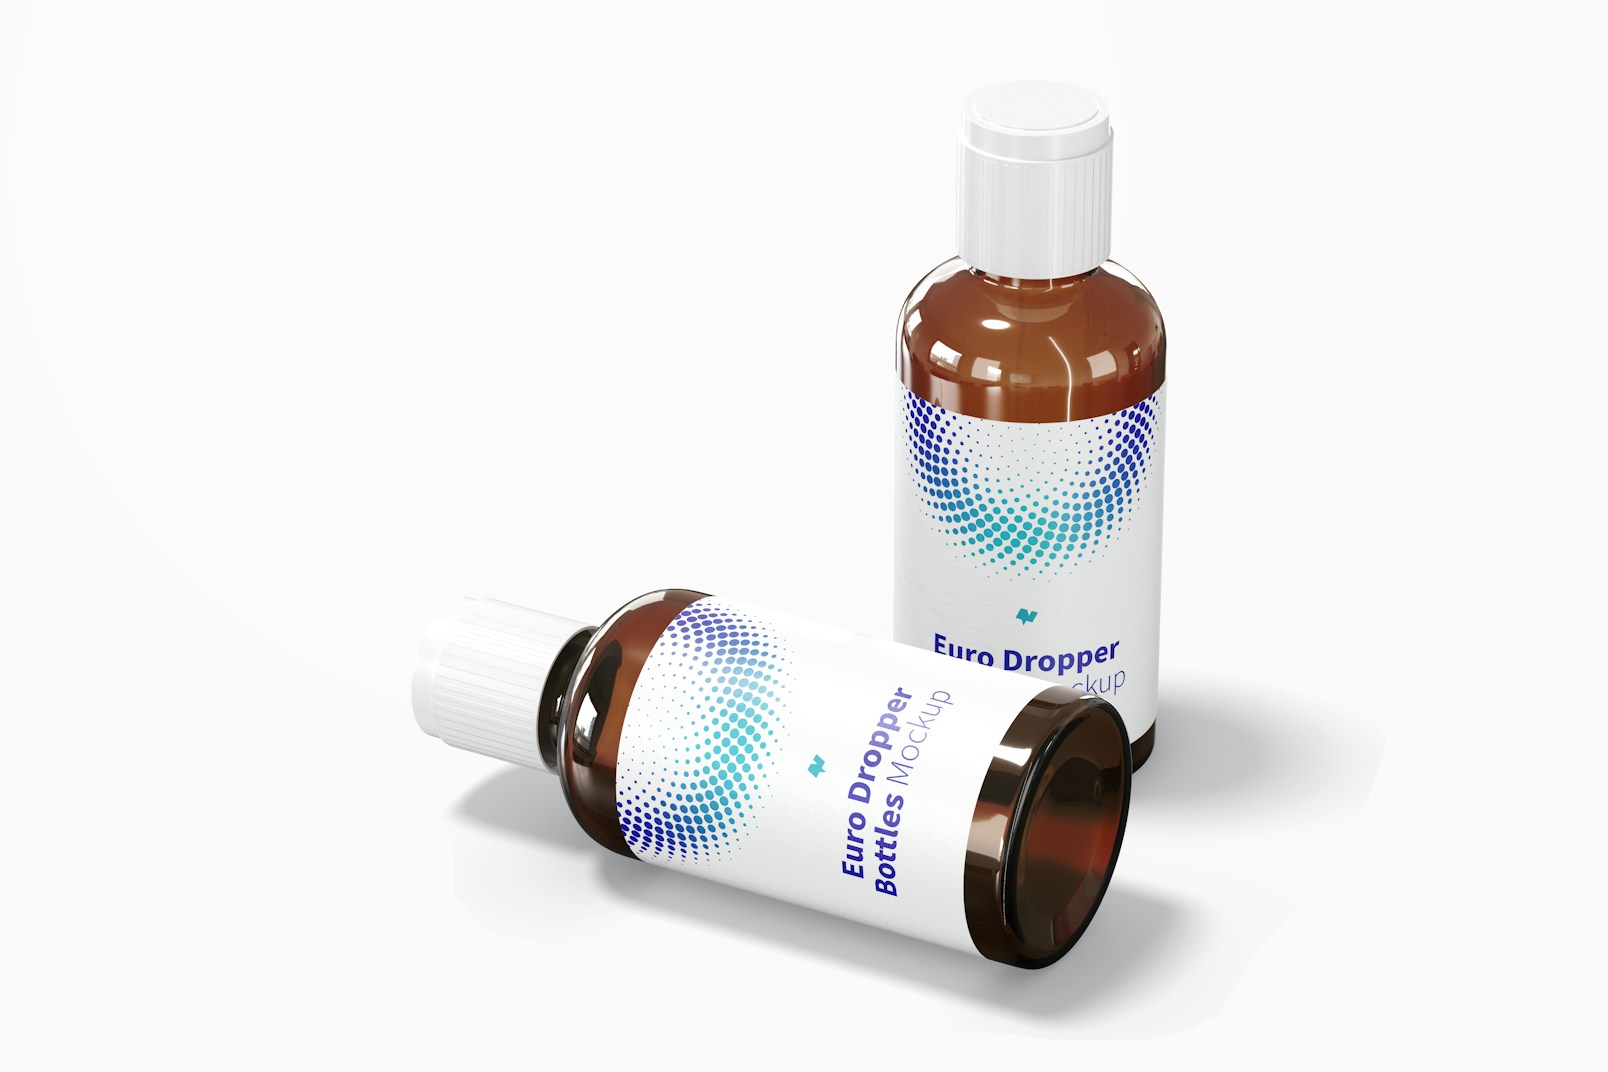 Euro Dropper Bottles with Orifice Reducers Mockup